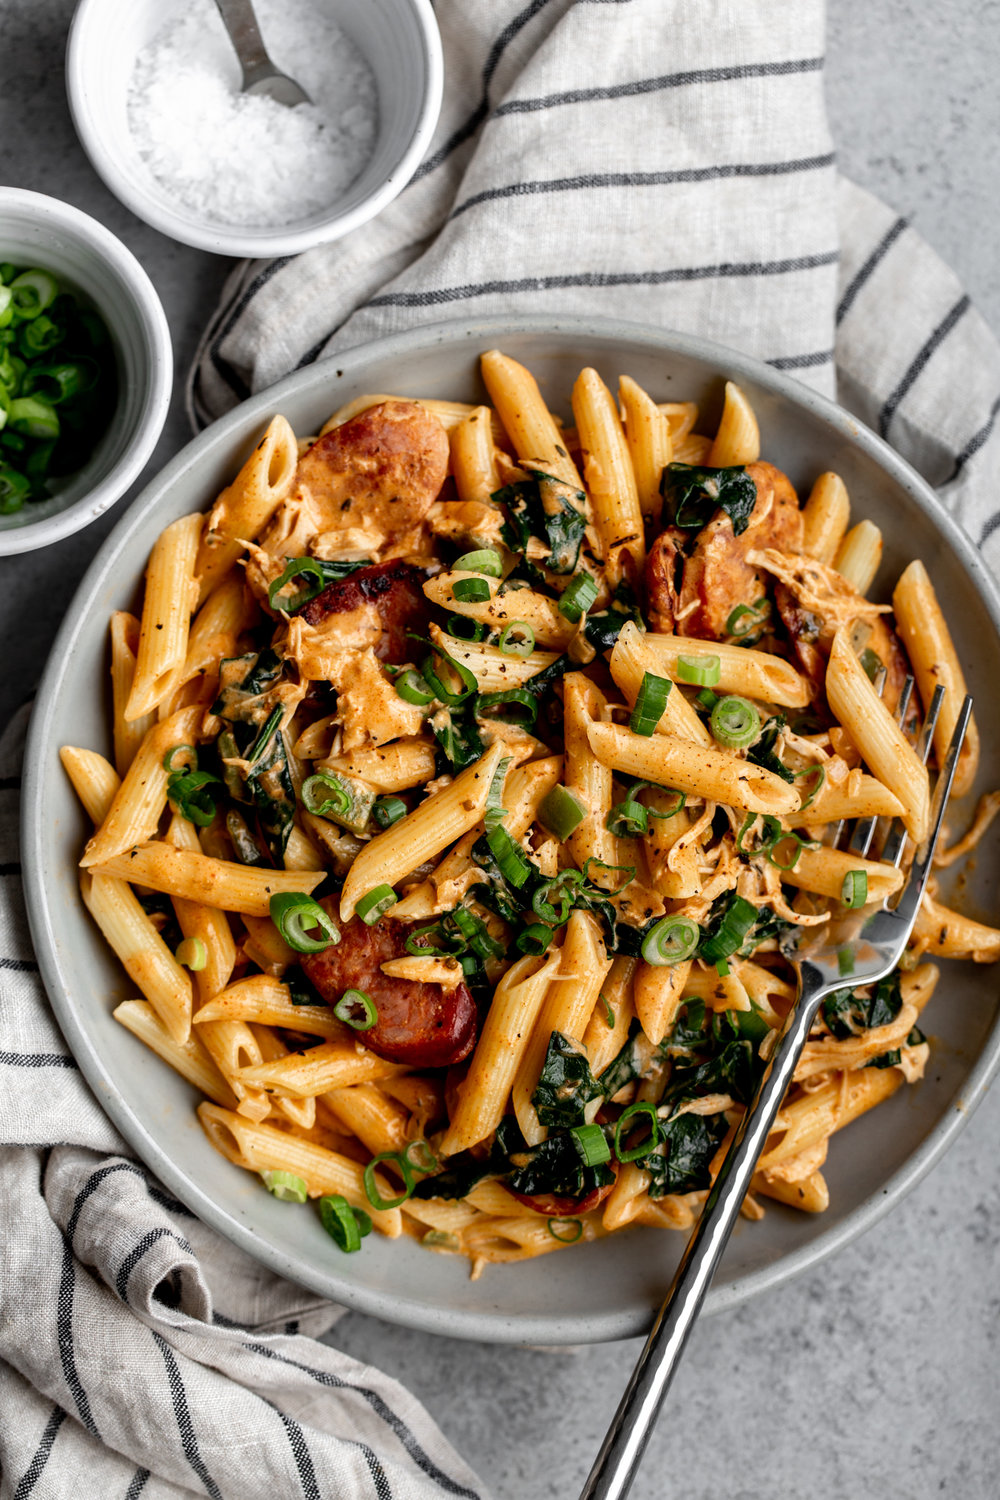 Creamy Cajun Pasta with Chicken and Andouille Sausage in pasta bowl